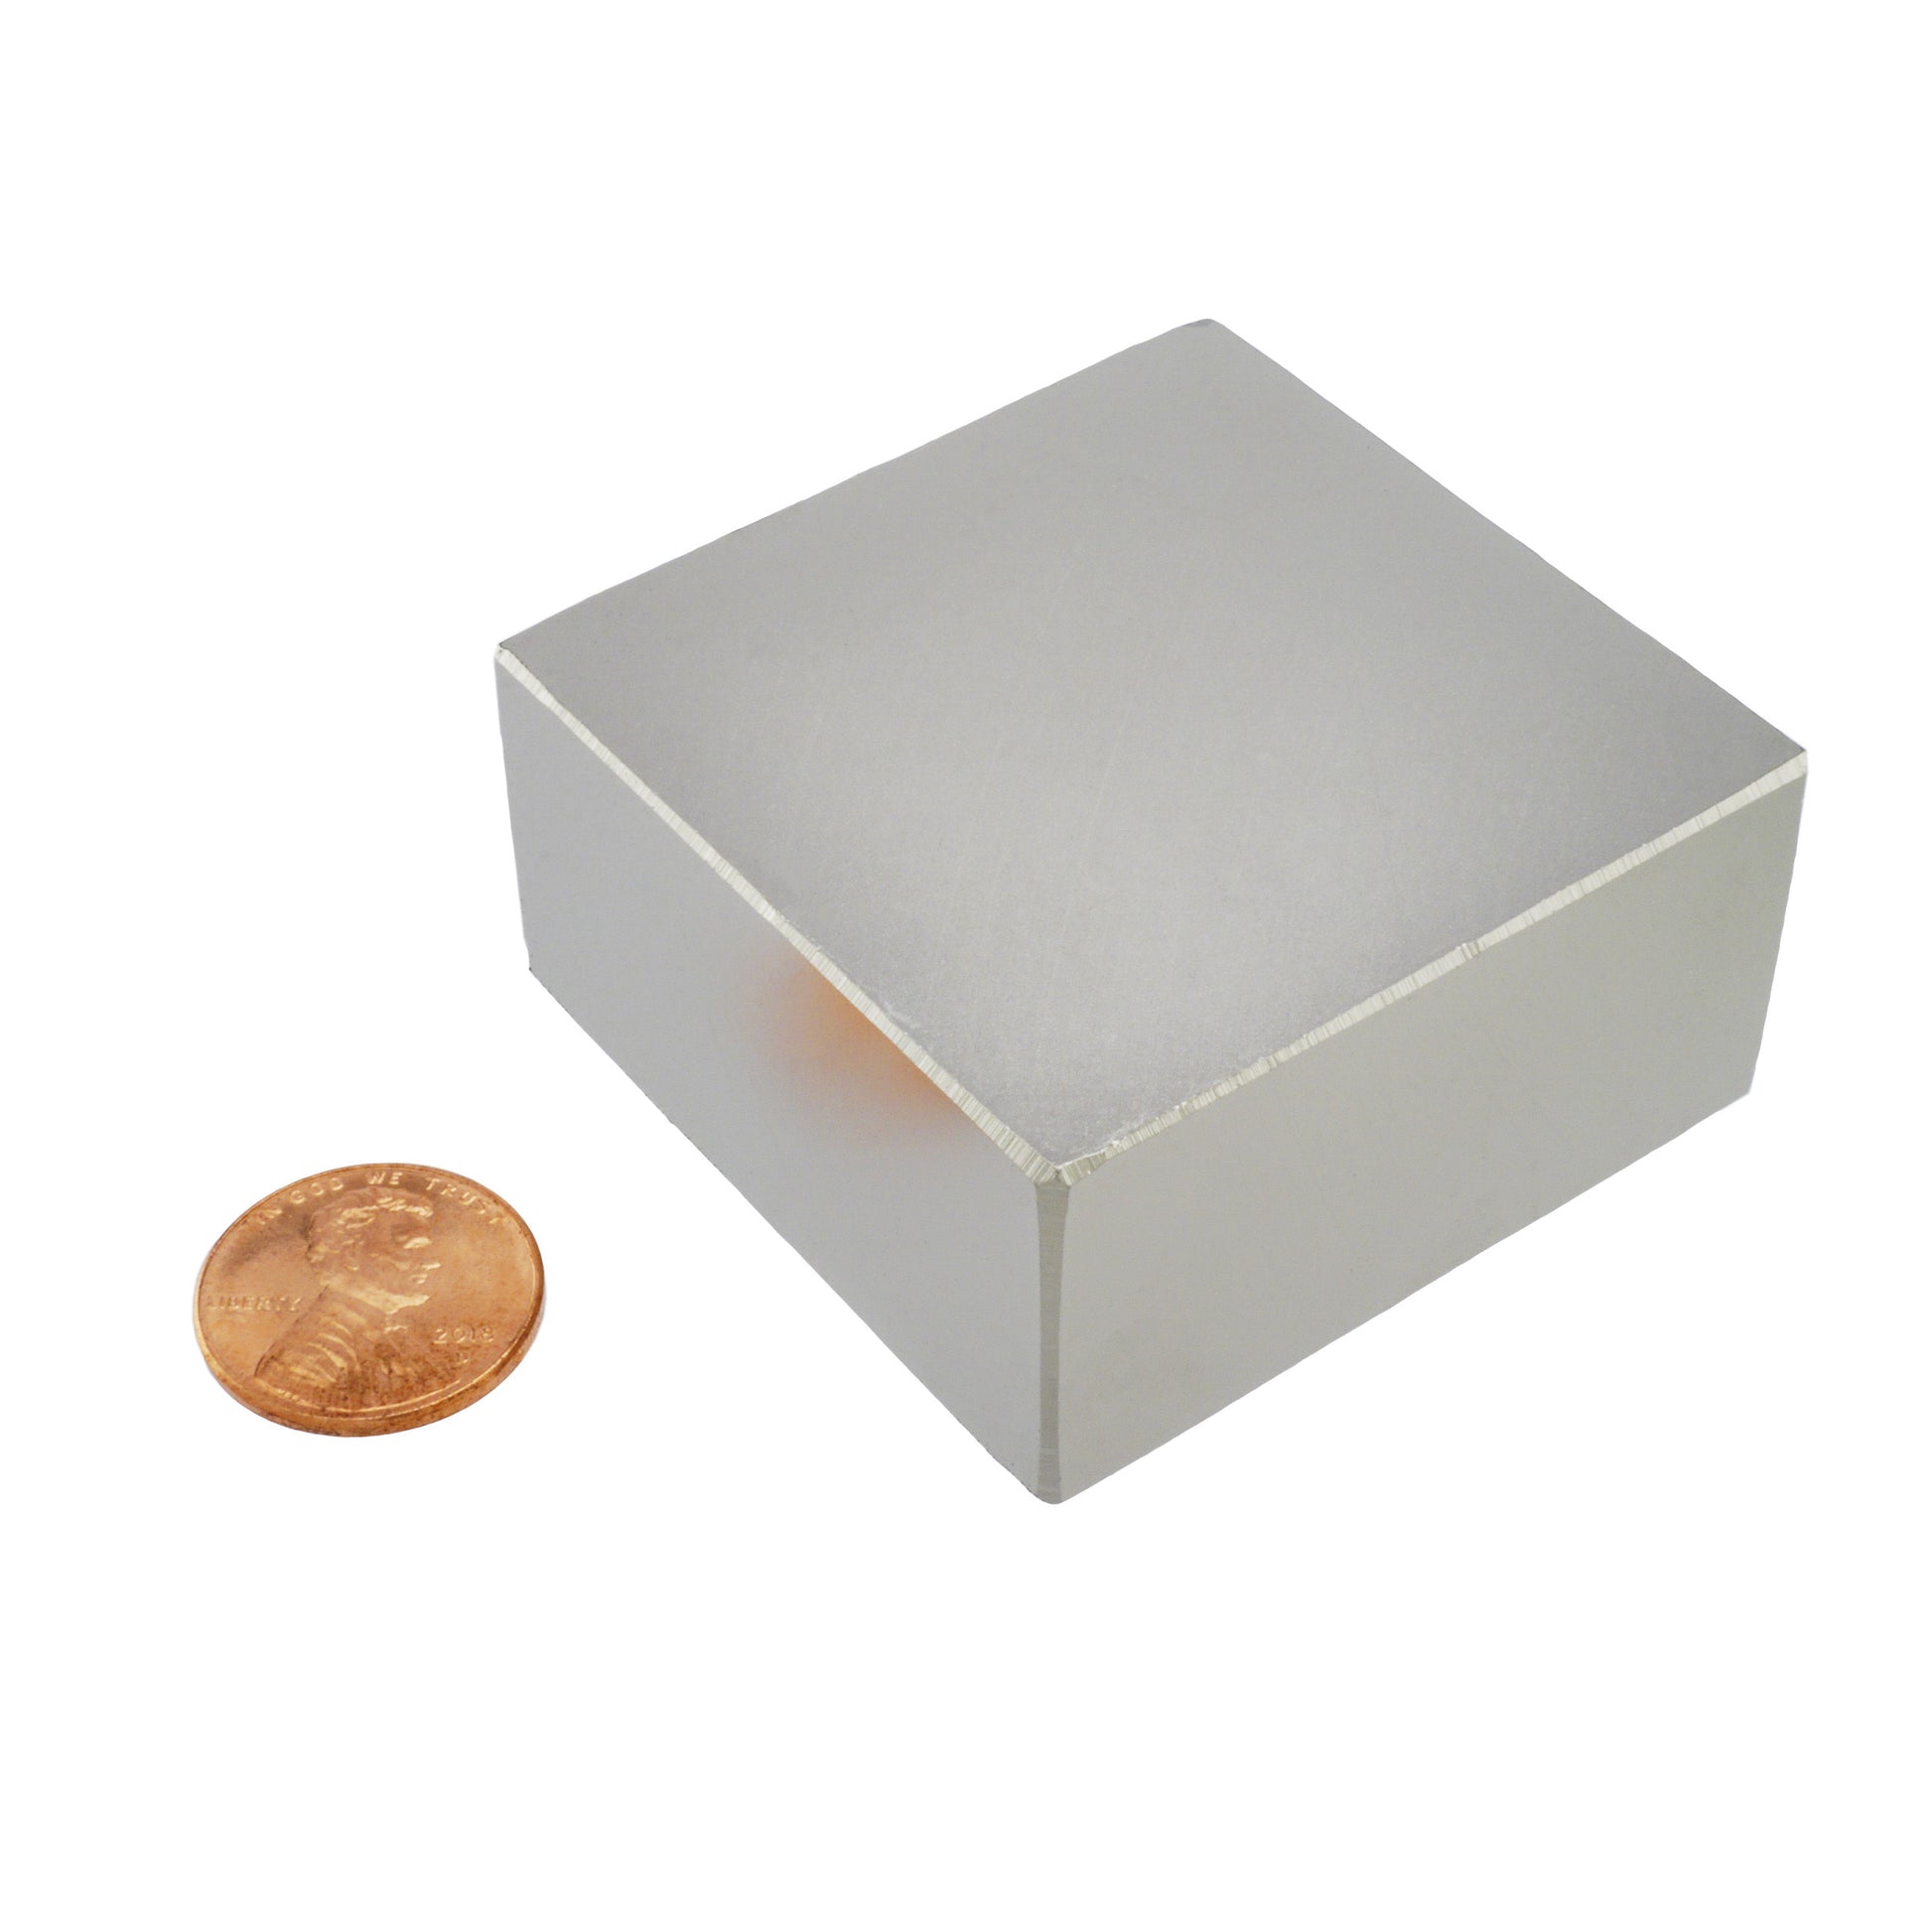 Load image into Gallery viewer, NB147N-35 Neodymium Block Magnet - Compared to Penny for Size Reference